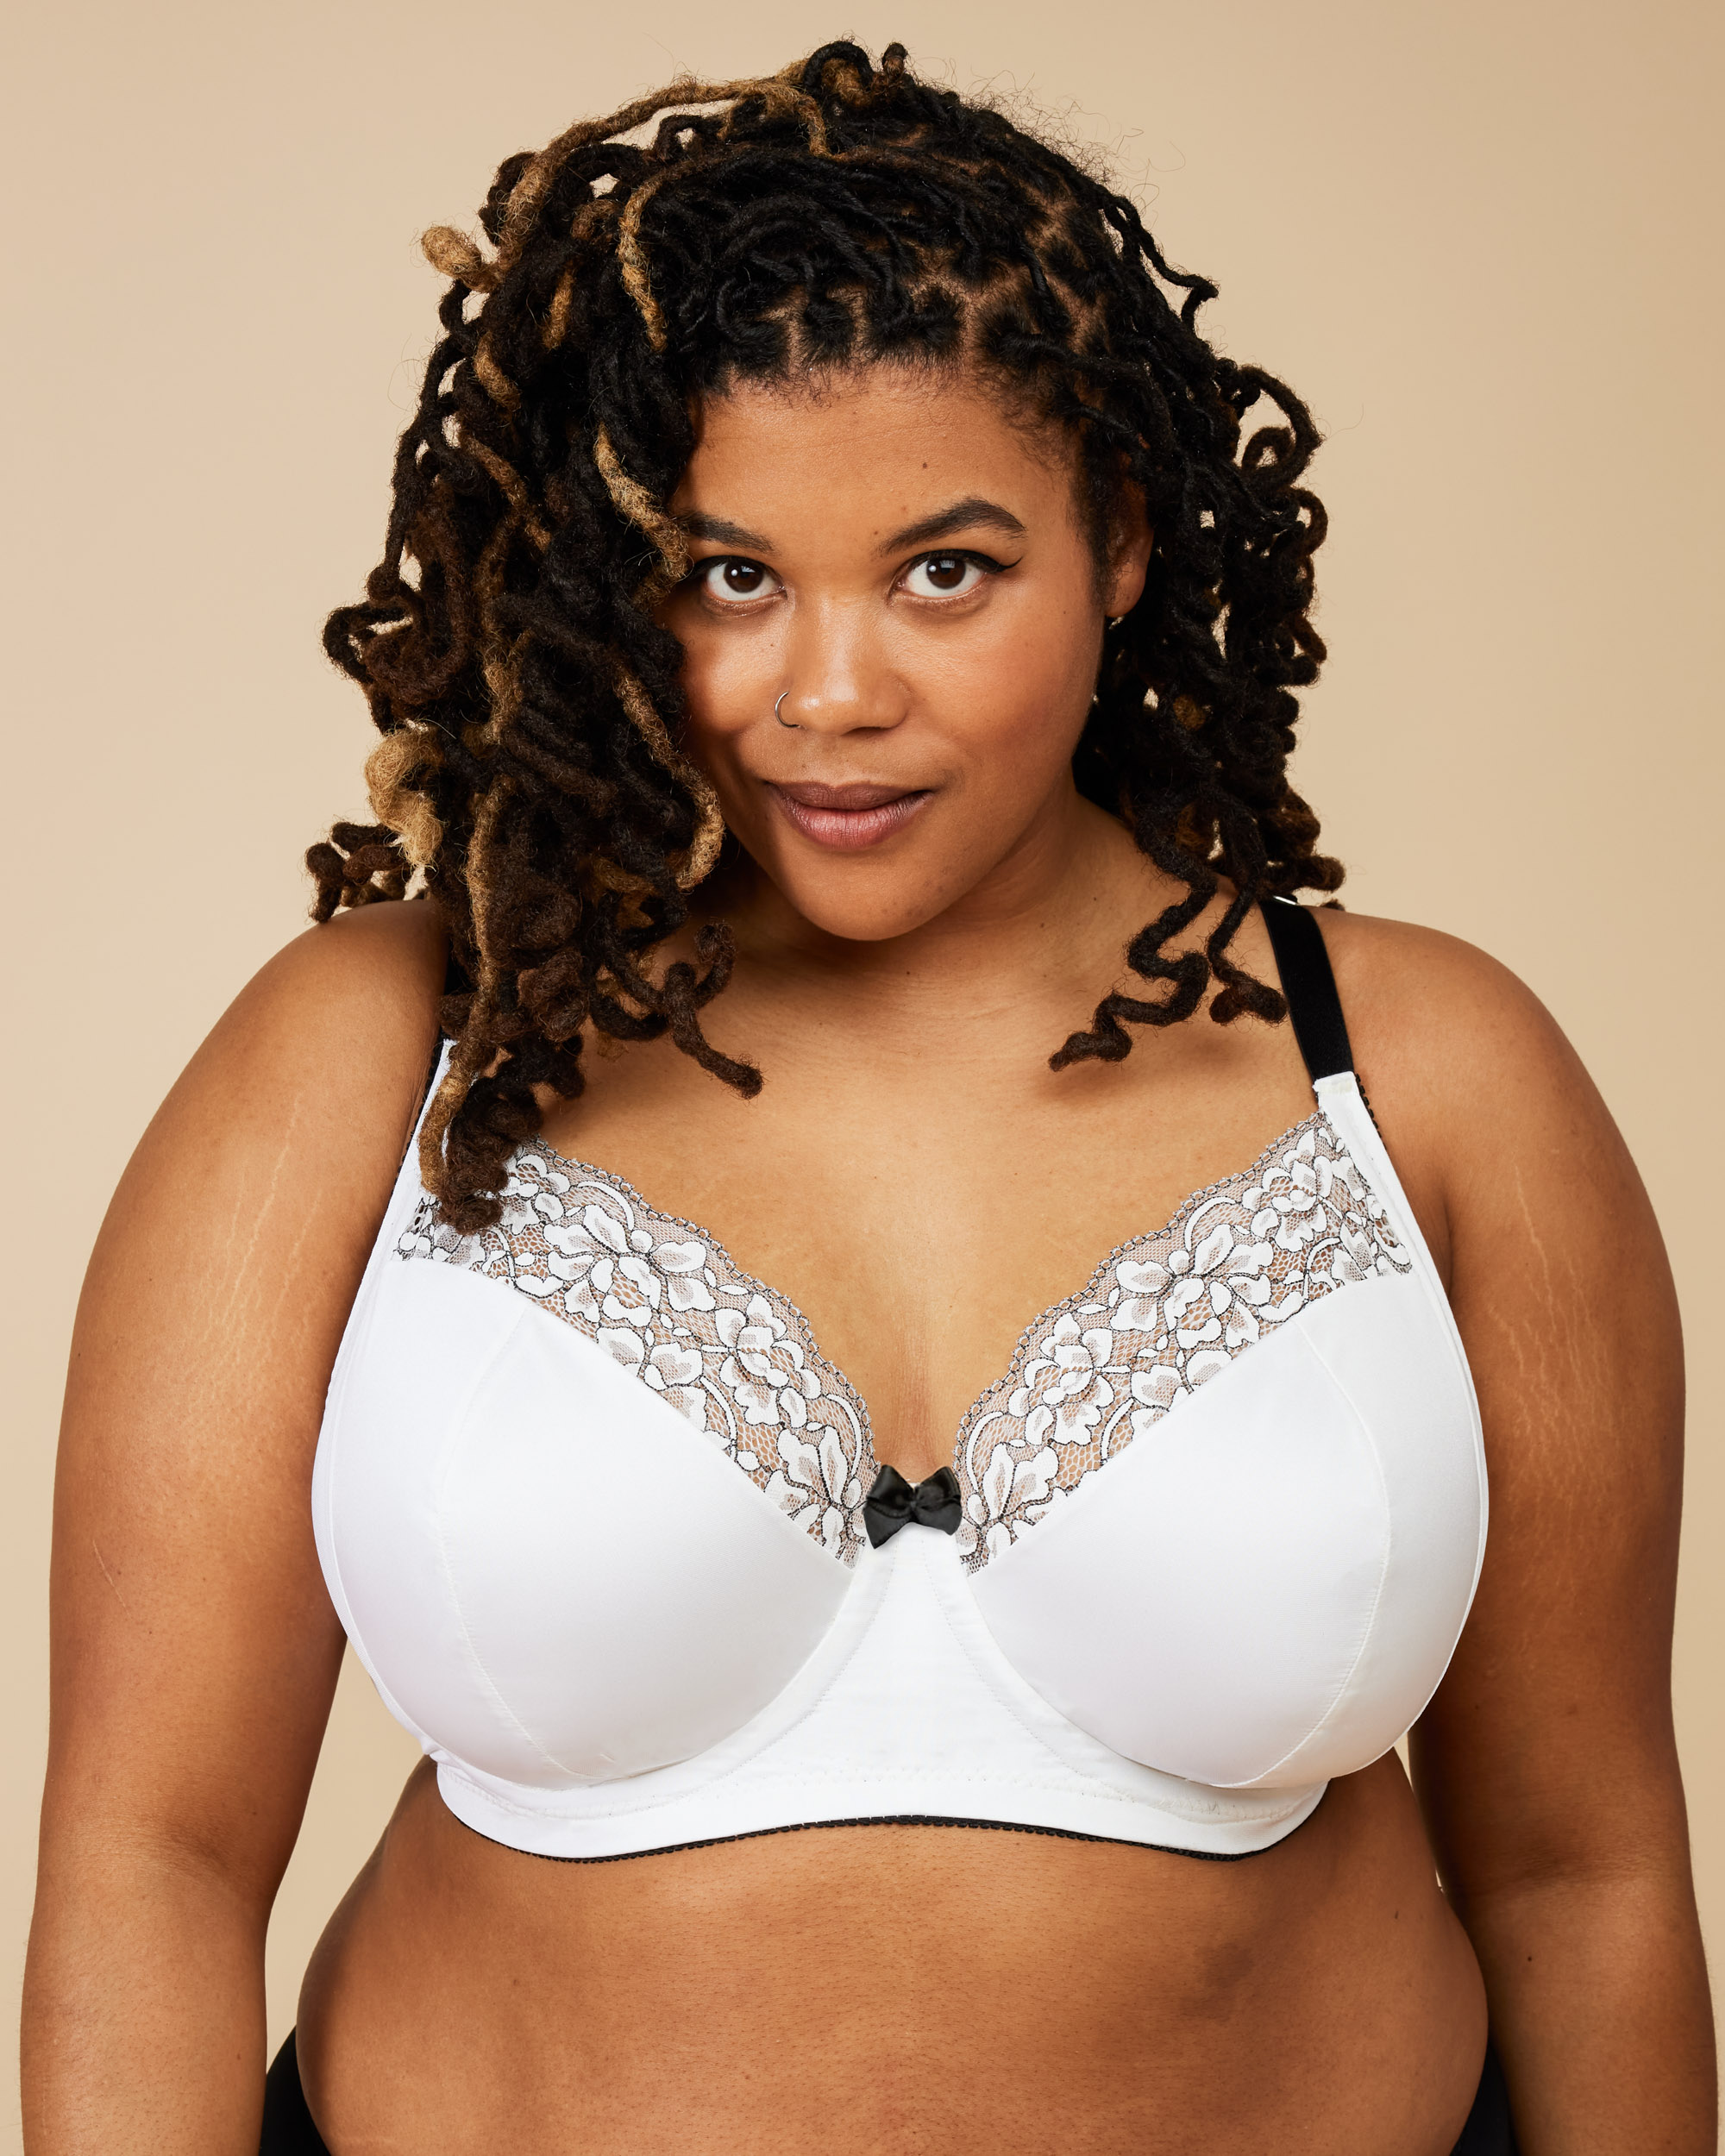 Willowdale Bra inspiration from ready-to-wear lingerie